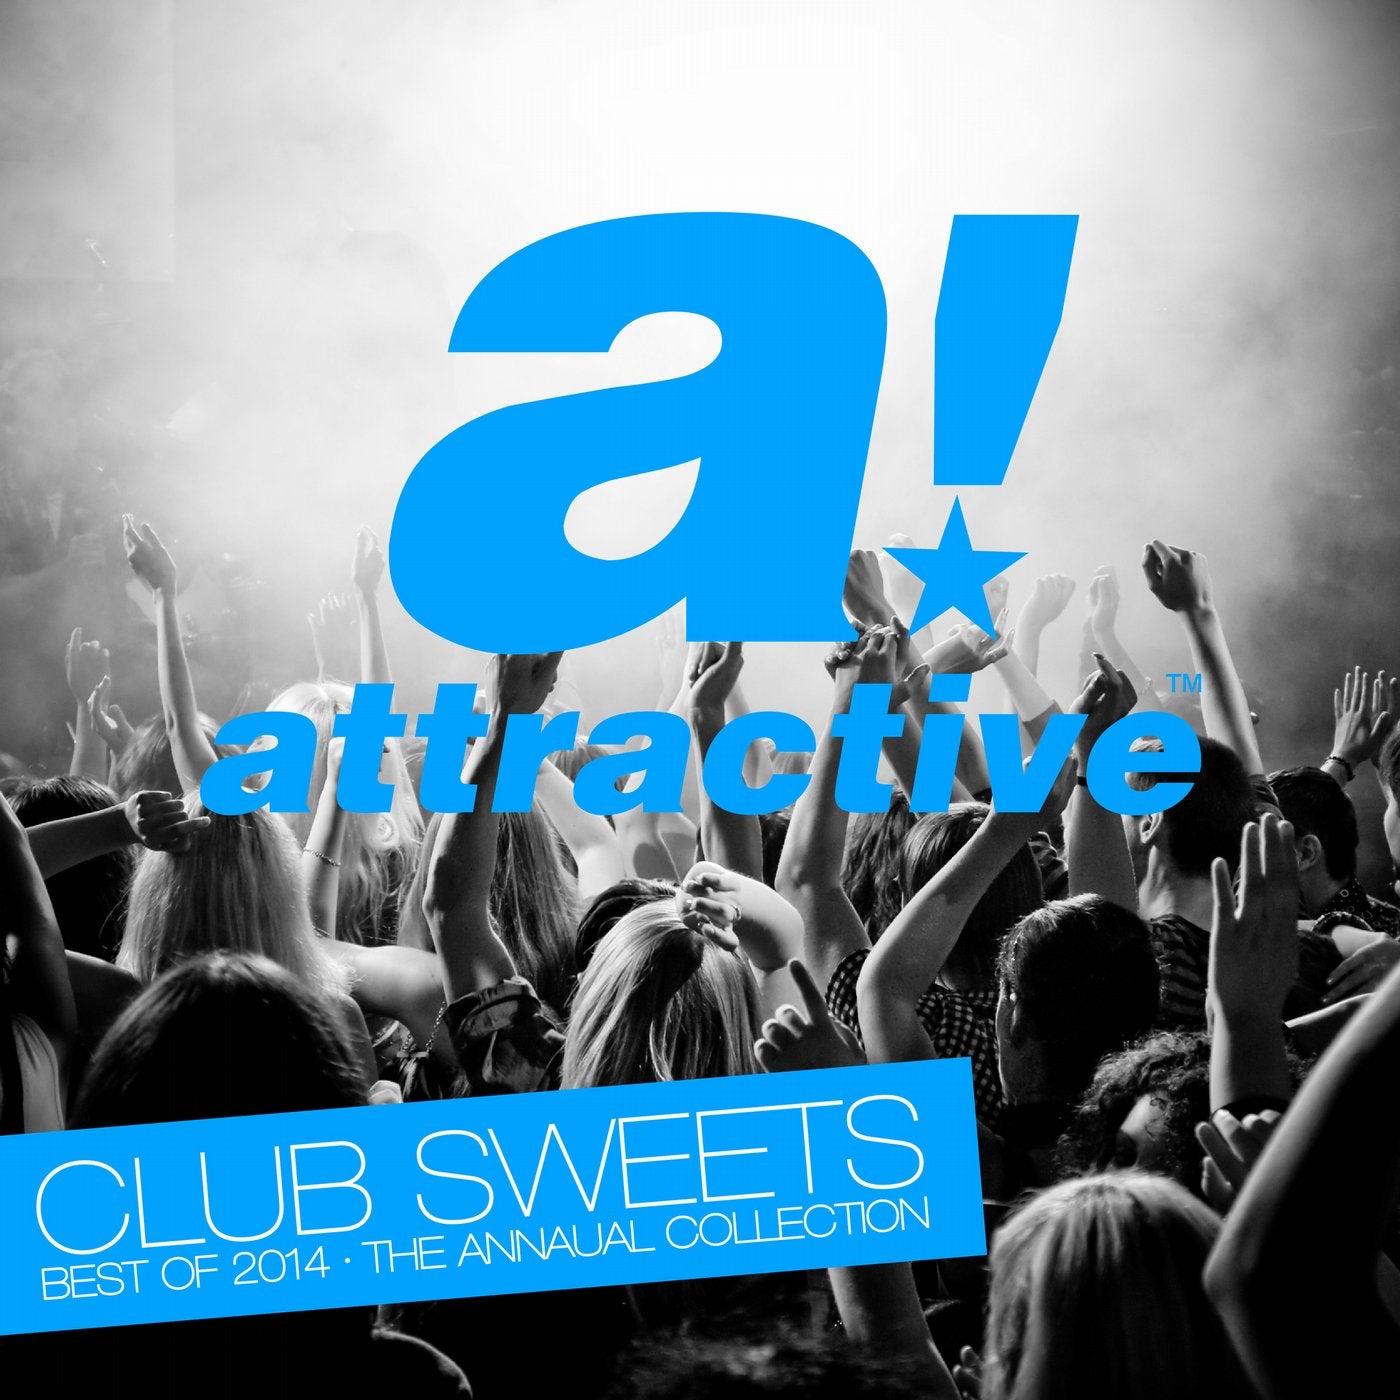 Attractive Club Sweets - Best of 2014 - The Annual Collection